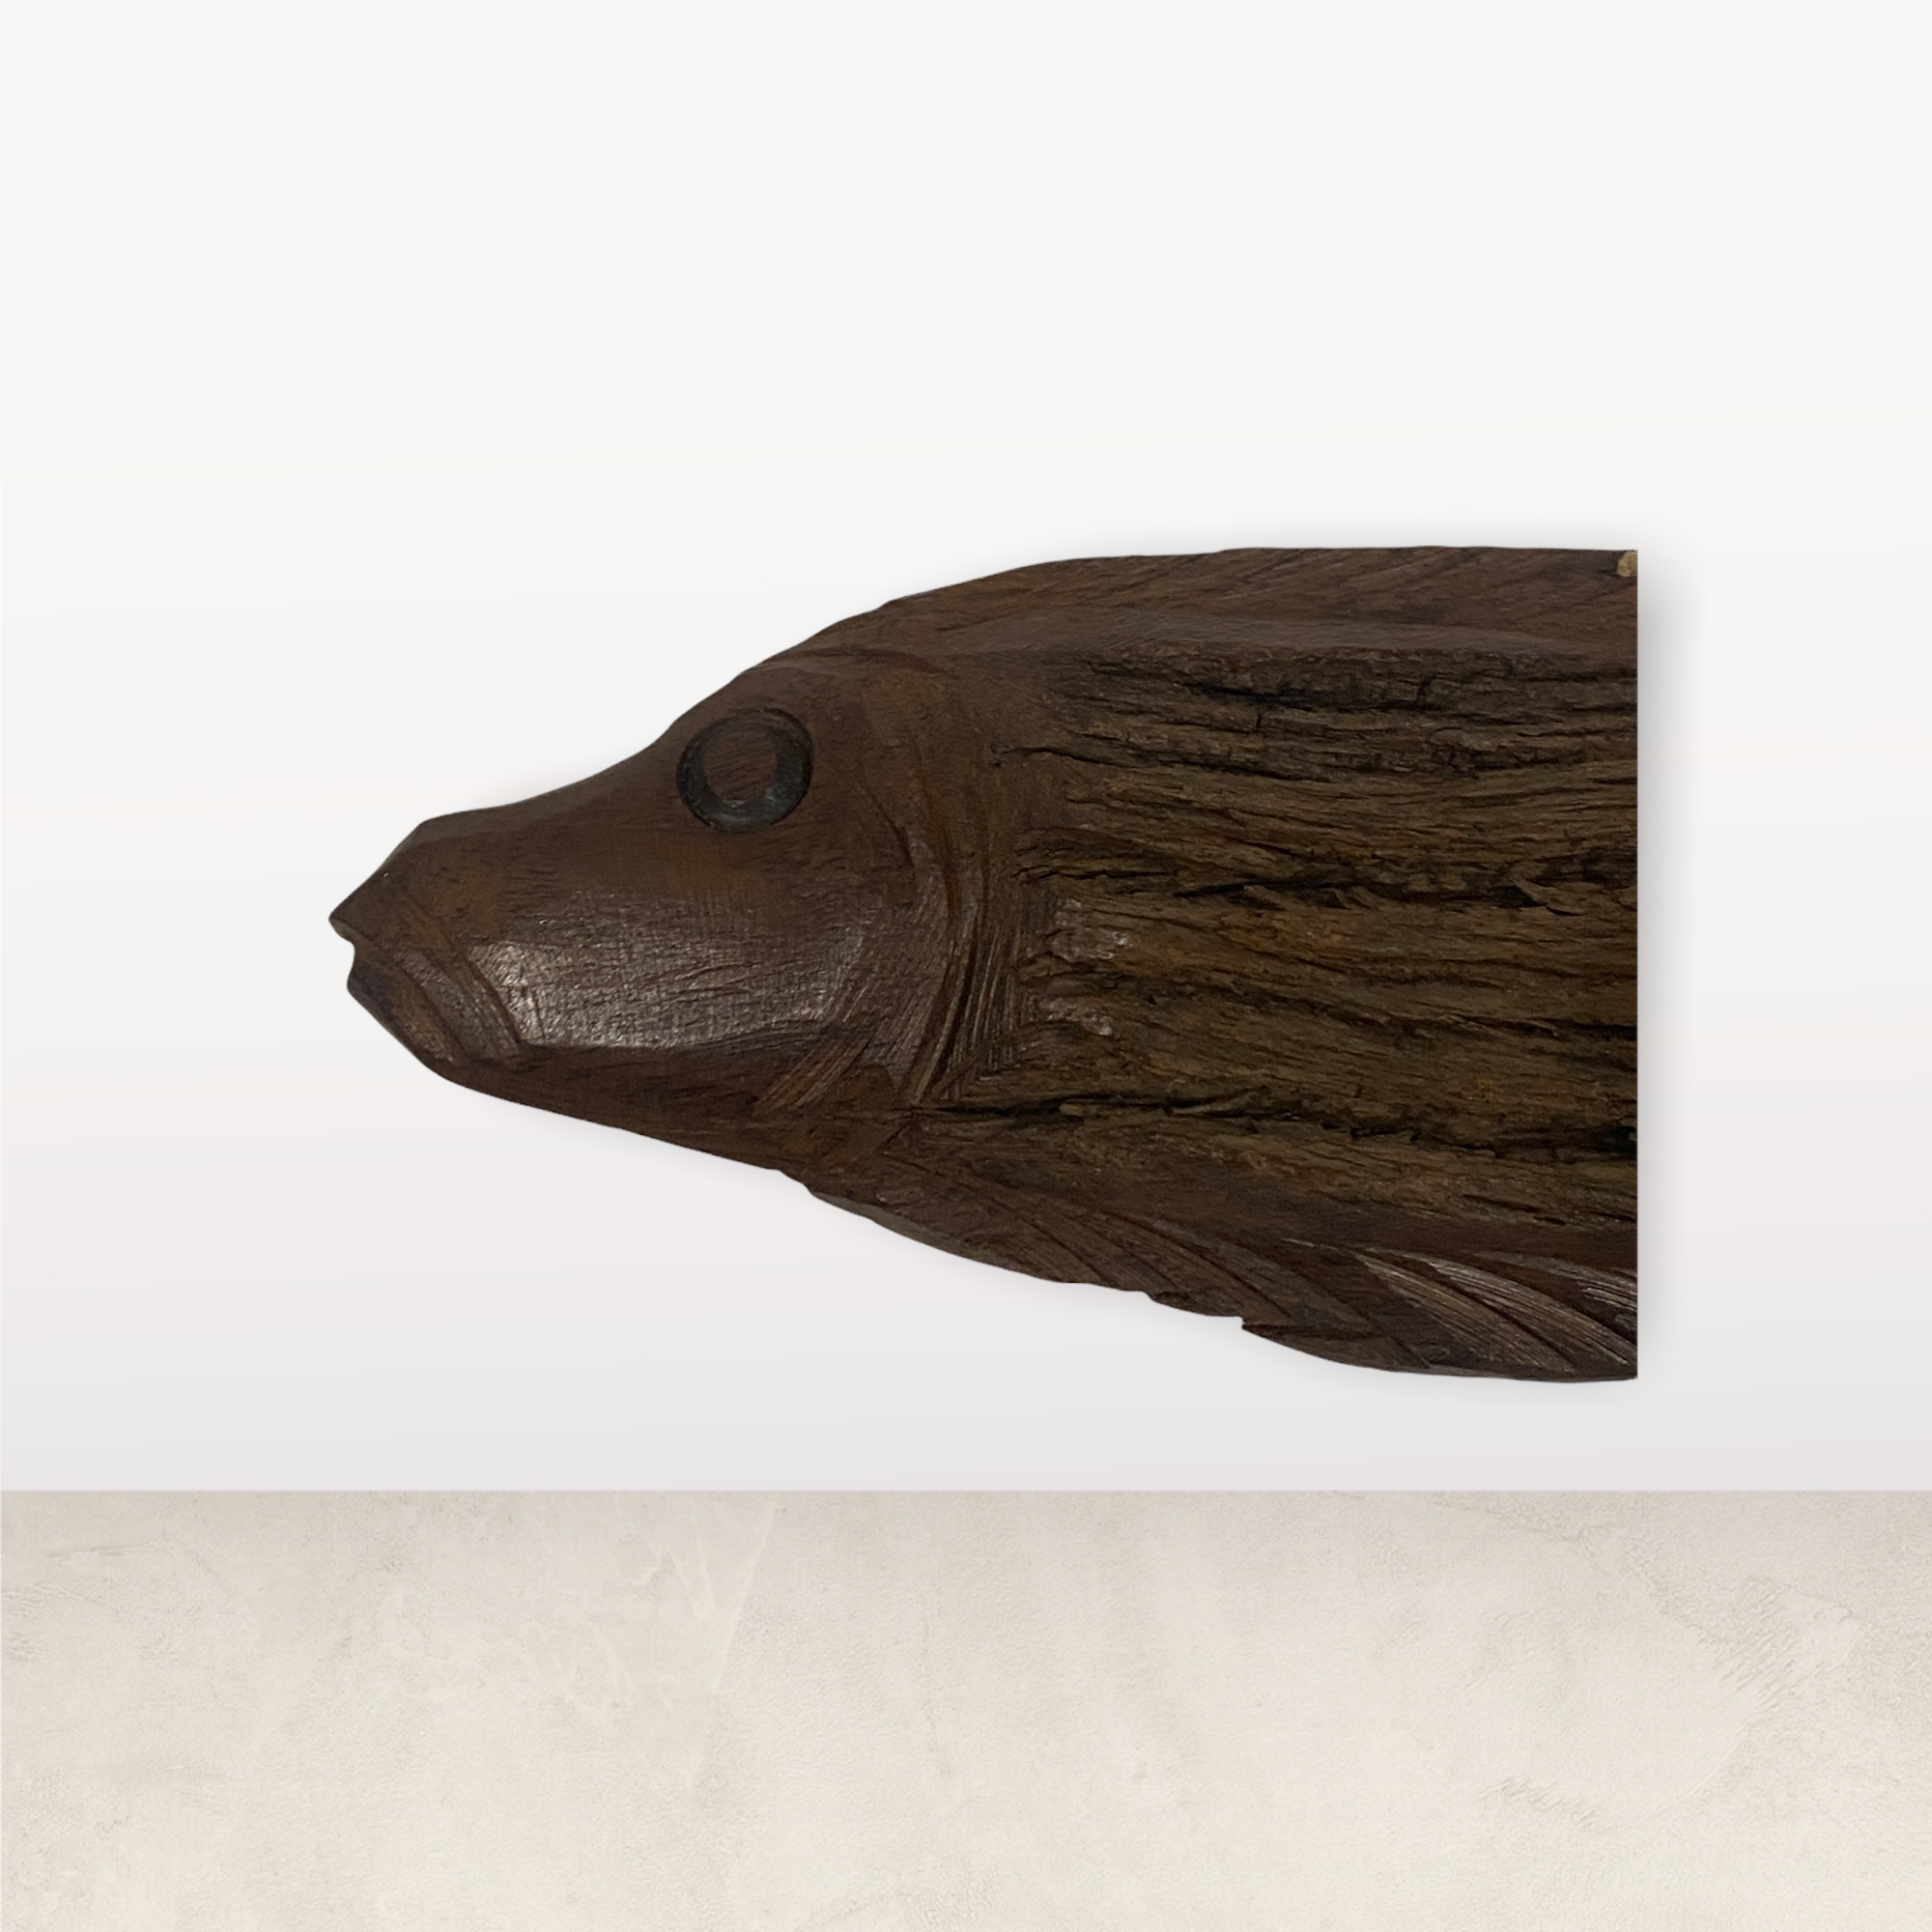 Driftwood Hand Carved Fish - (S01.1)